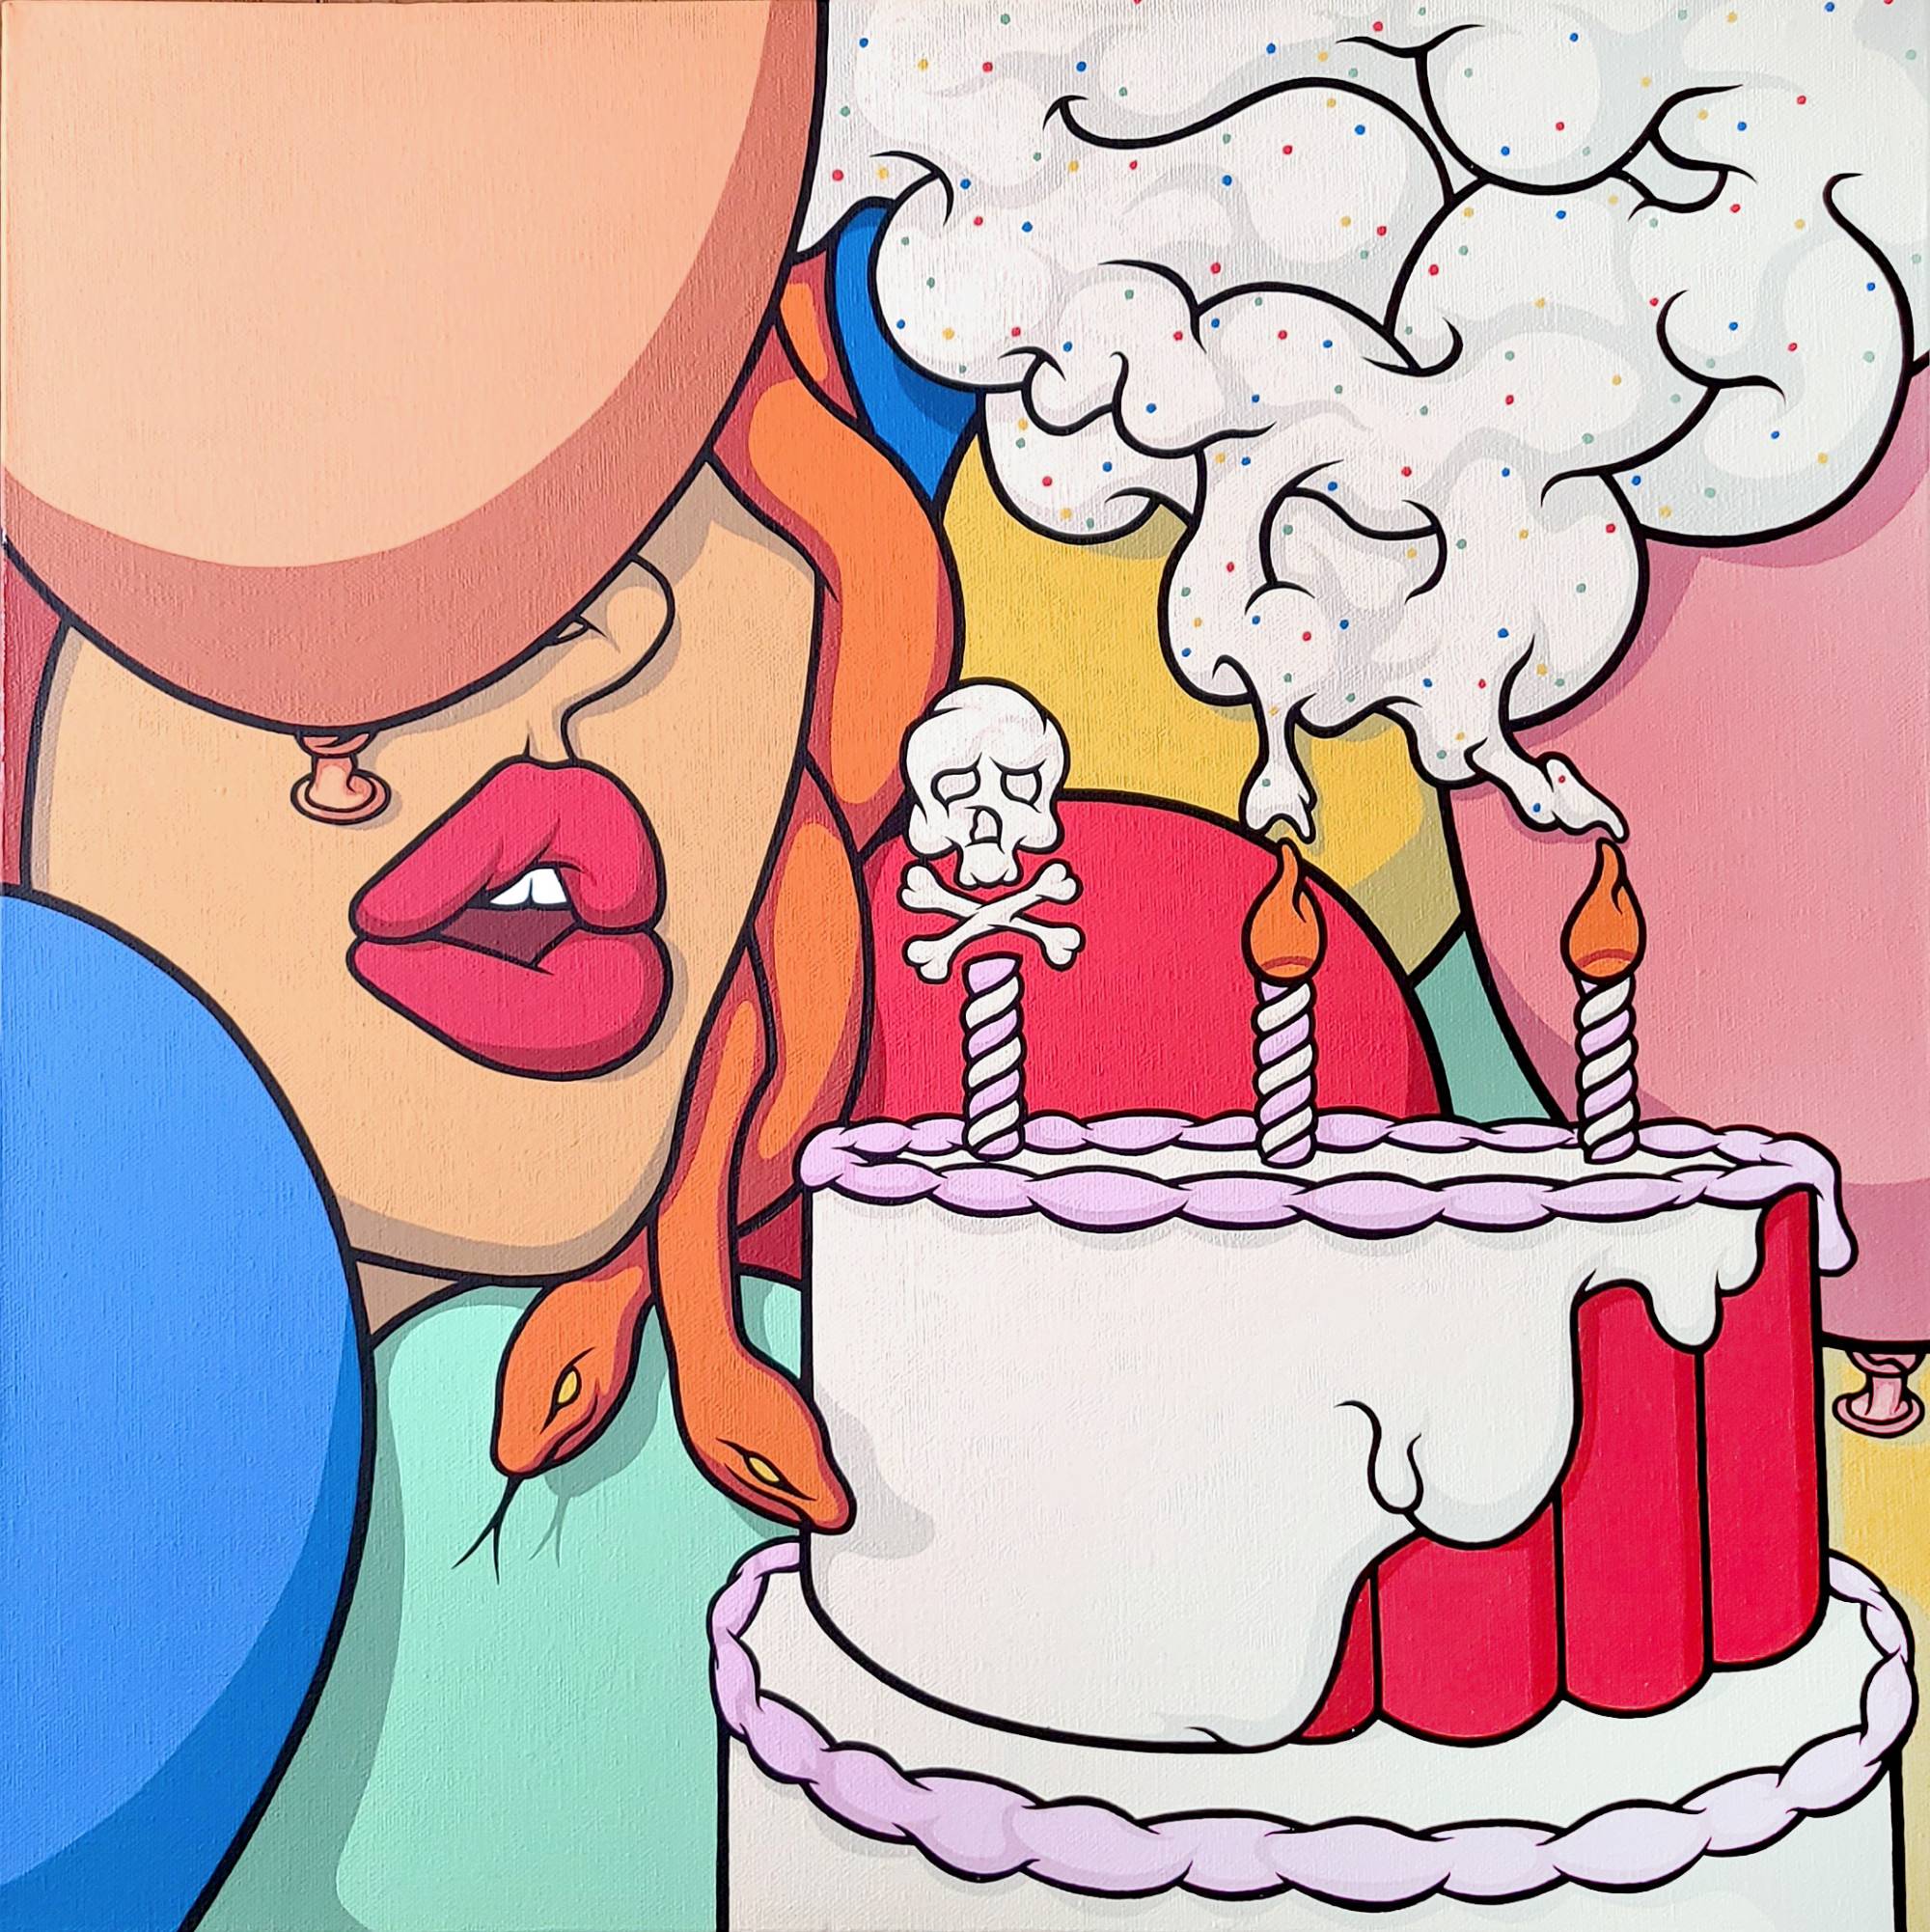 cake made of dynamite next to a woman's face with snake hair, her eye covered by balloons